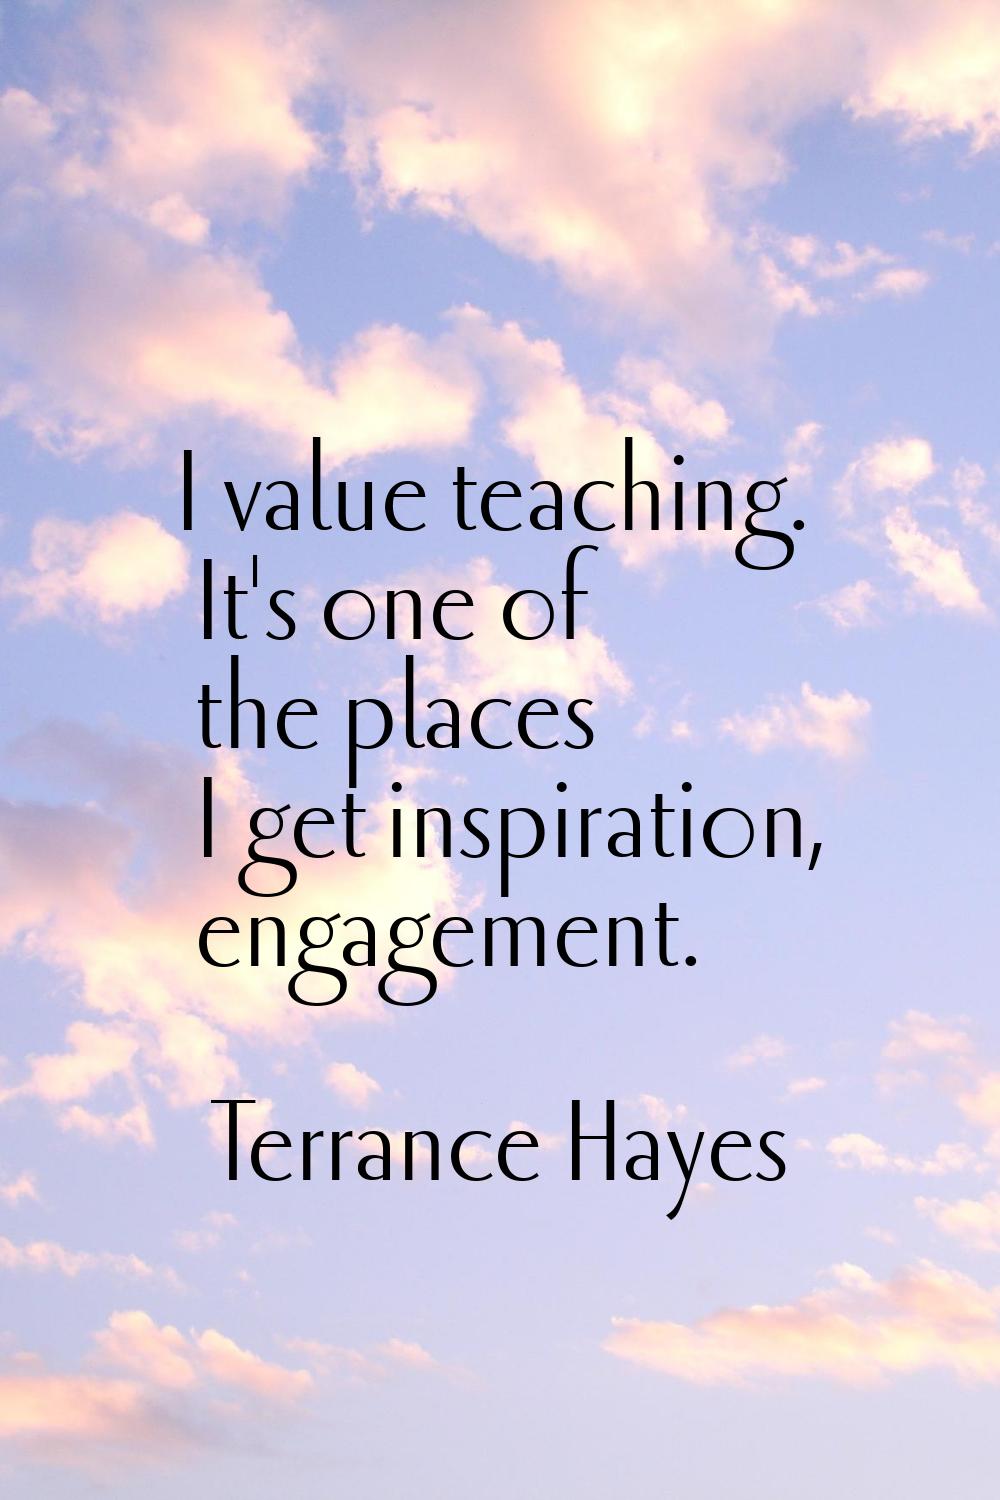 I value teaching. It's one of the places I get inspiration, engagement.